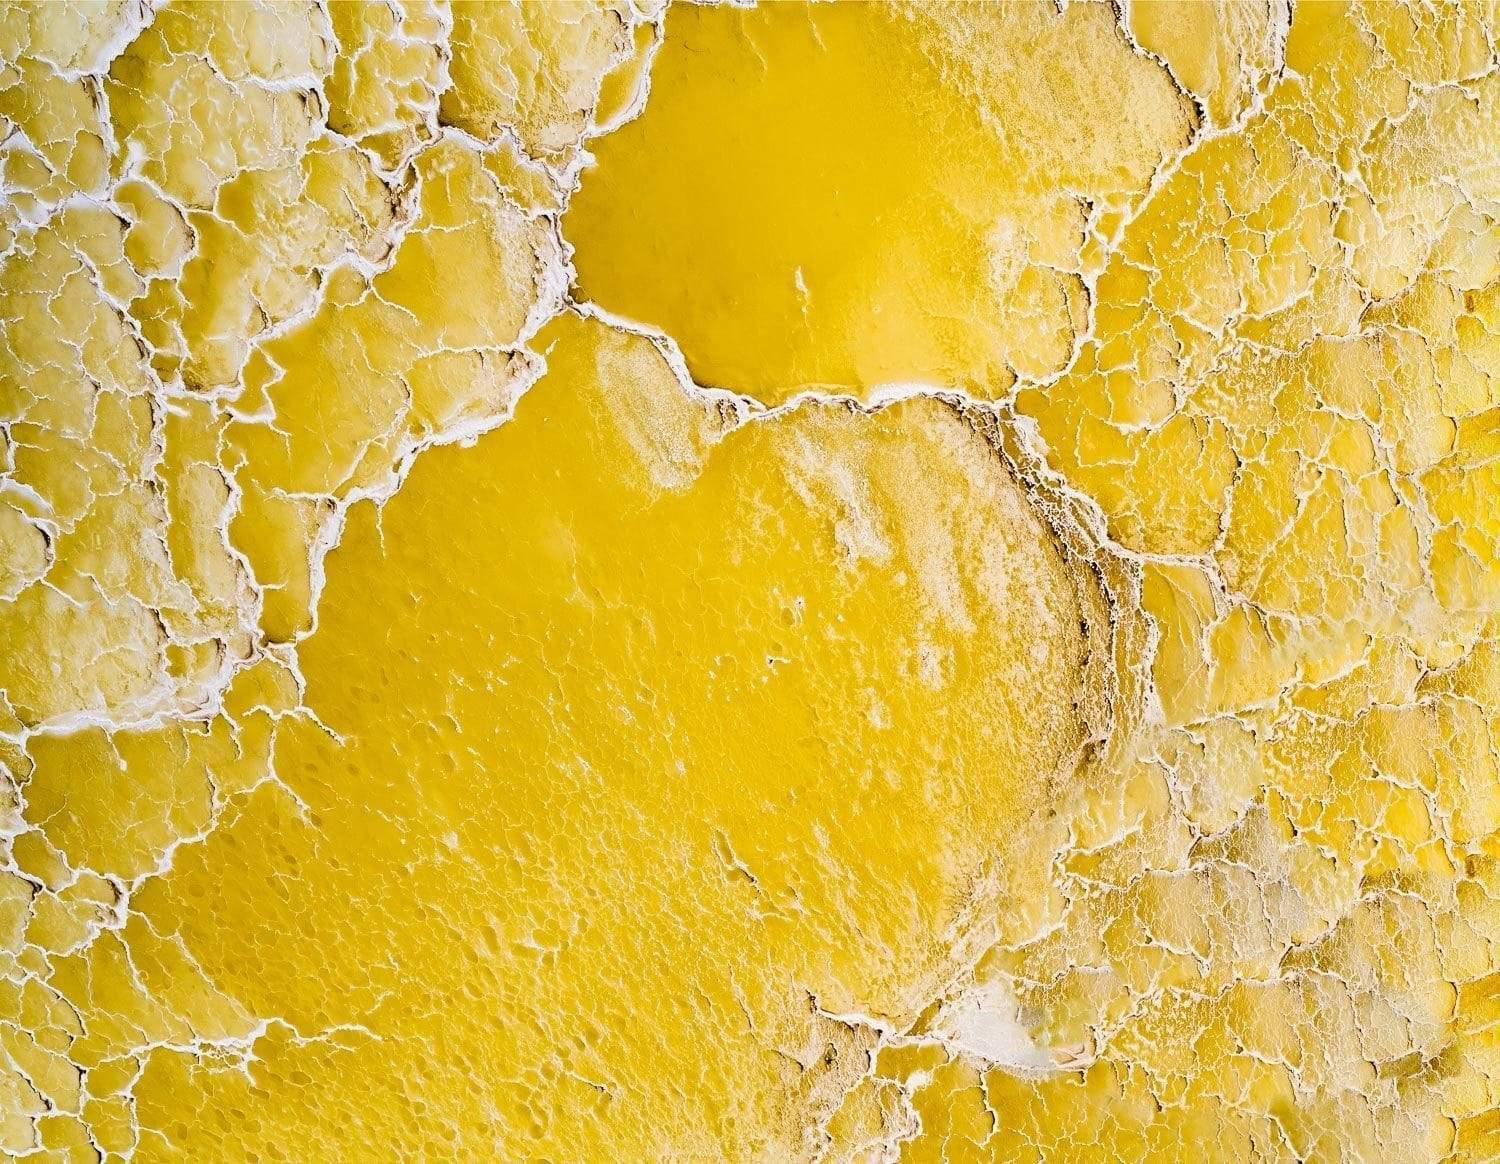 Aerial view of a yellow liquid land with white salt particles, Yellow Salt